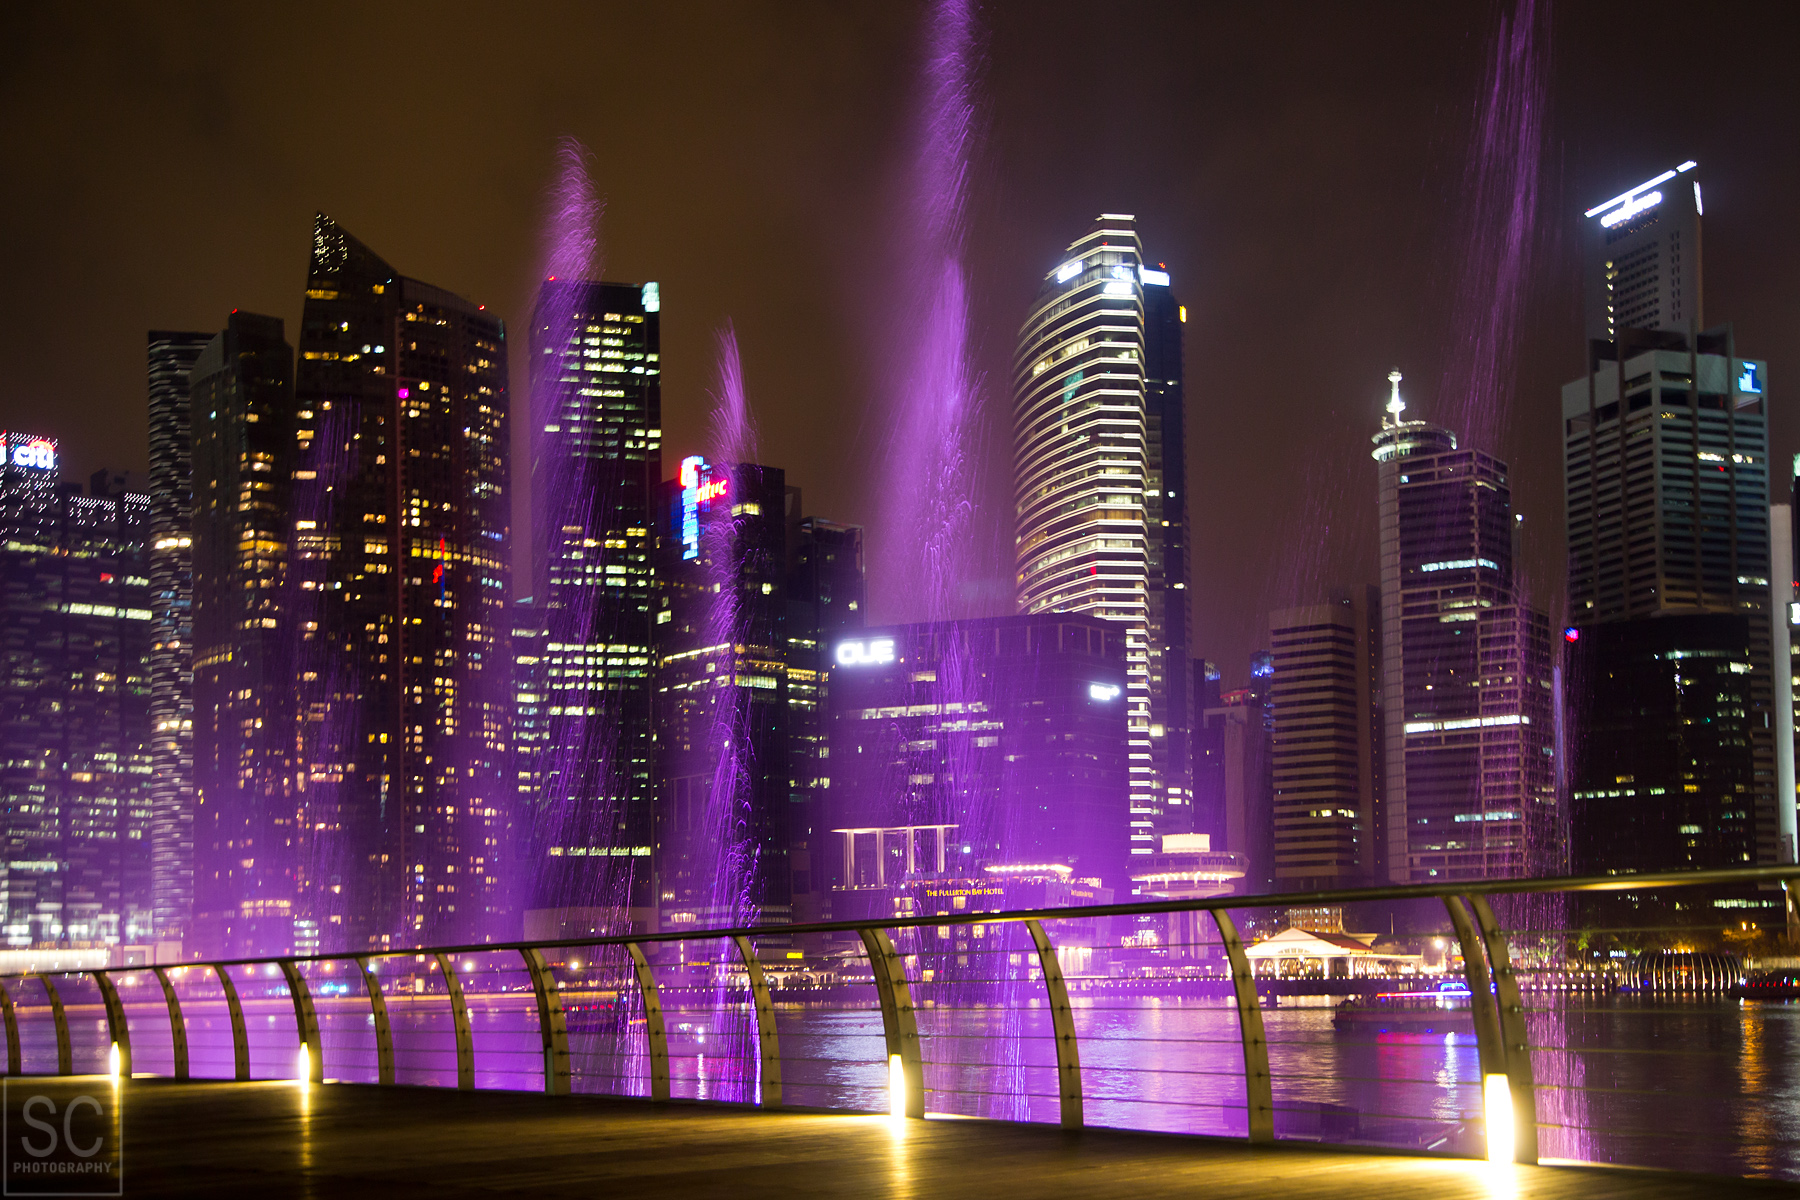 The light show at the Marina Bay Sands hotel.